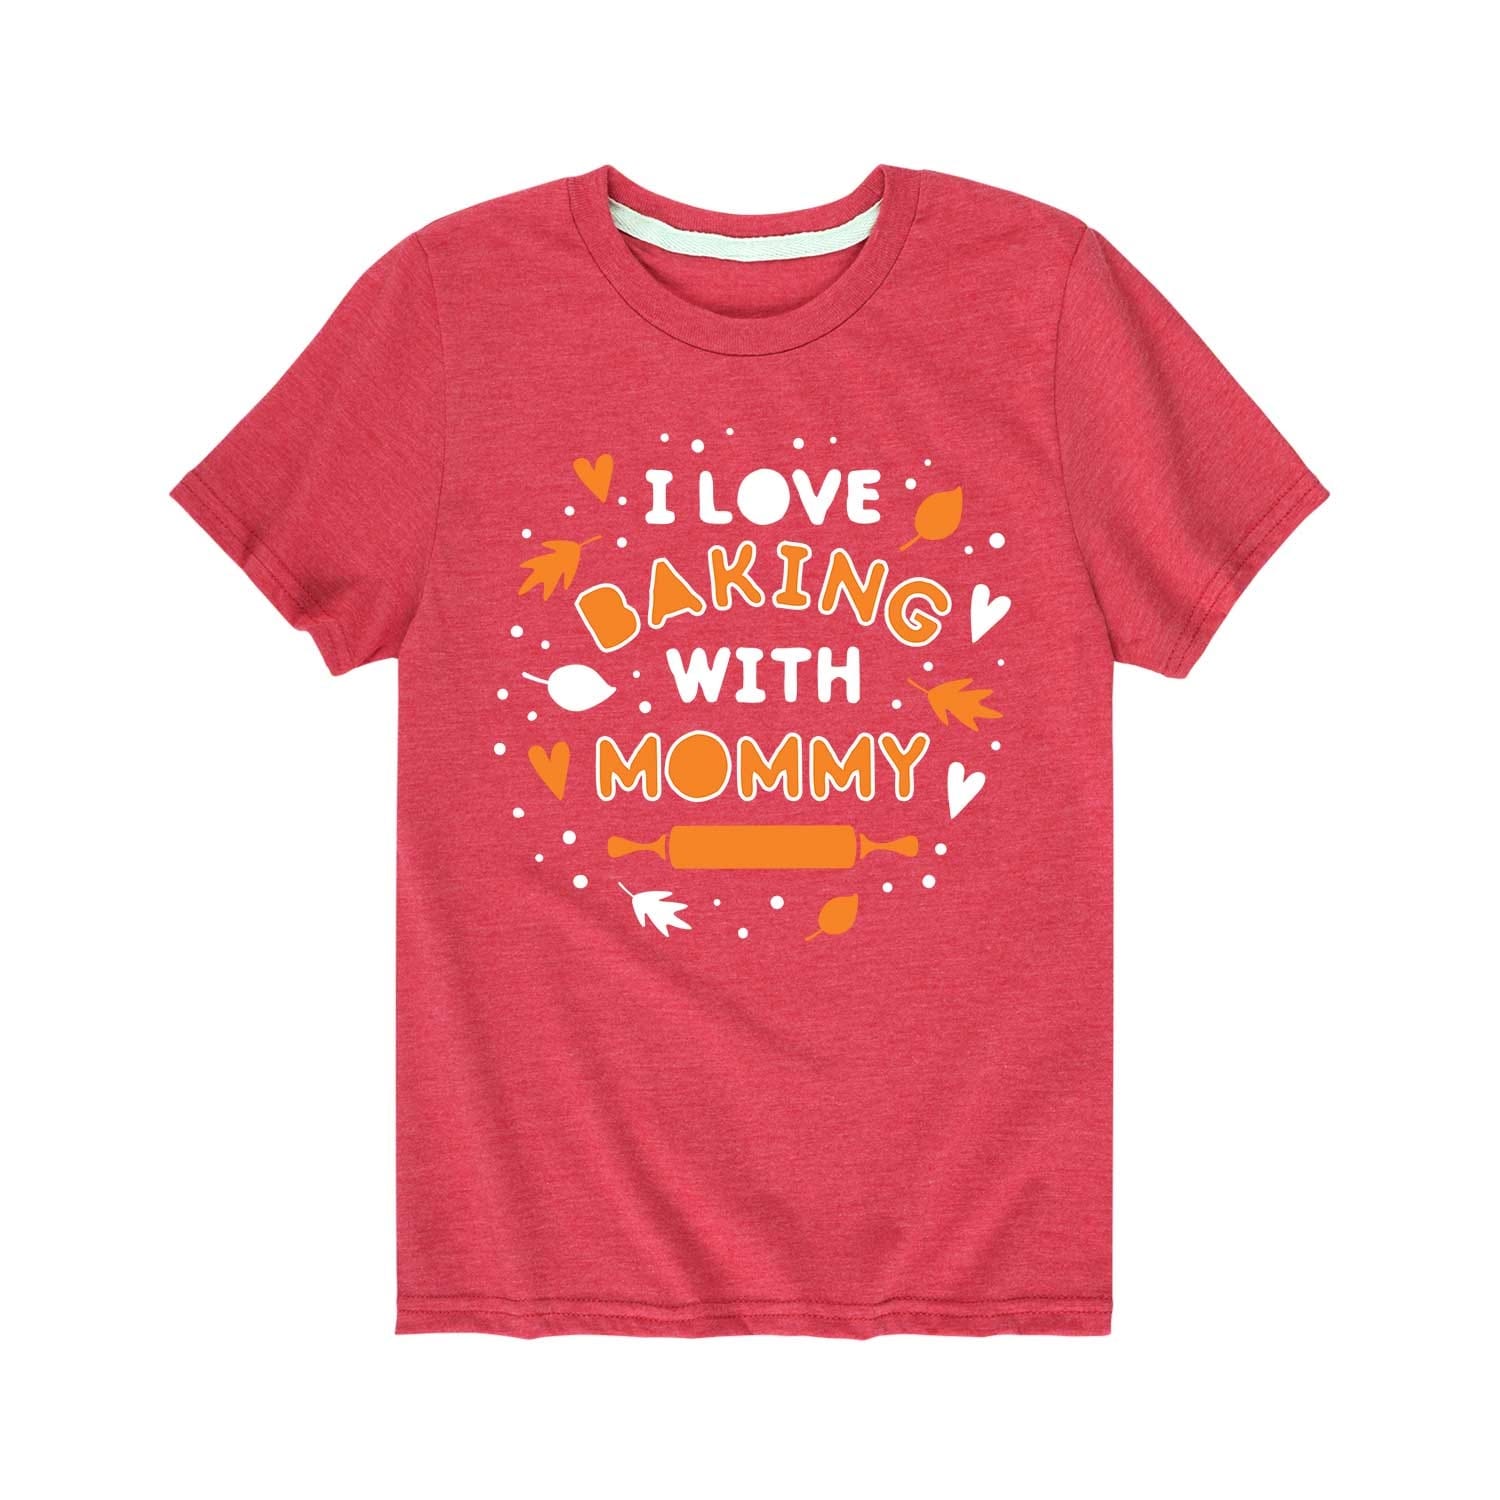 I Love Baking With Mommy - Youth Short Sleeve Tee